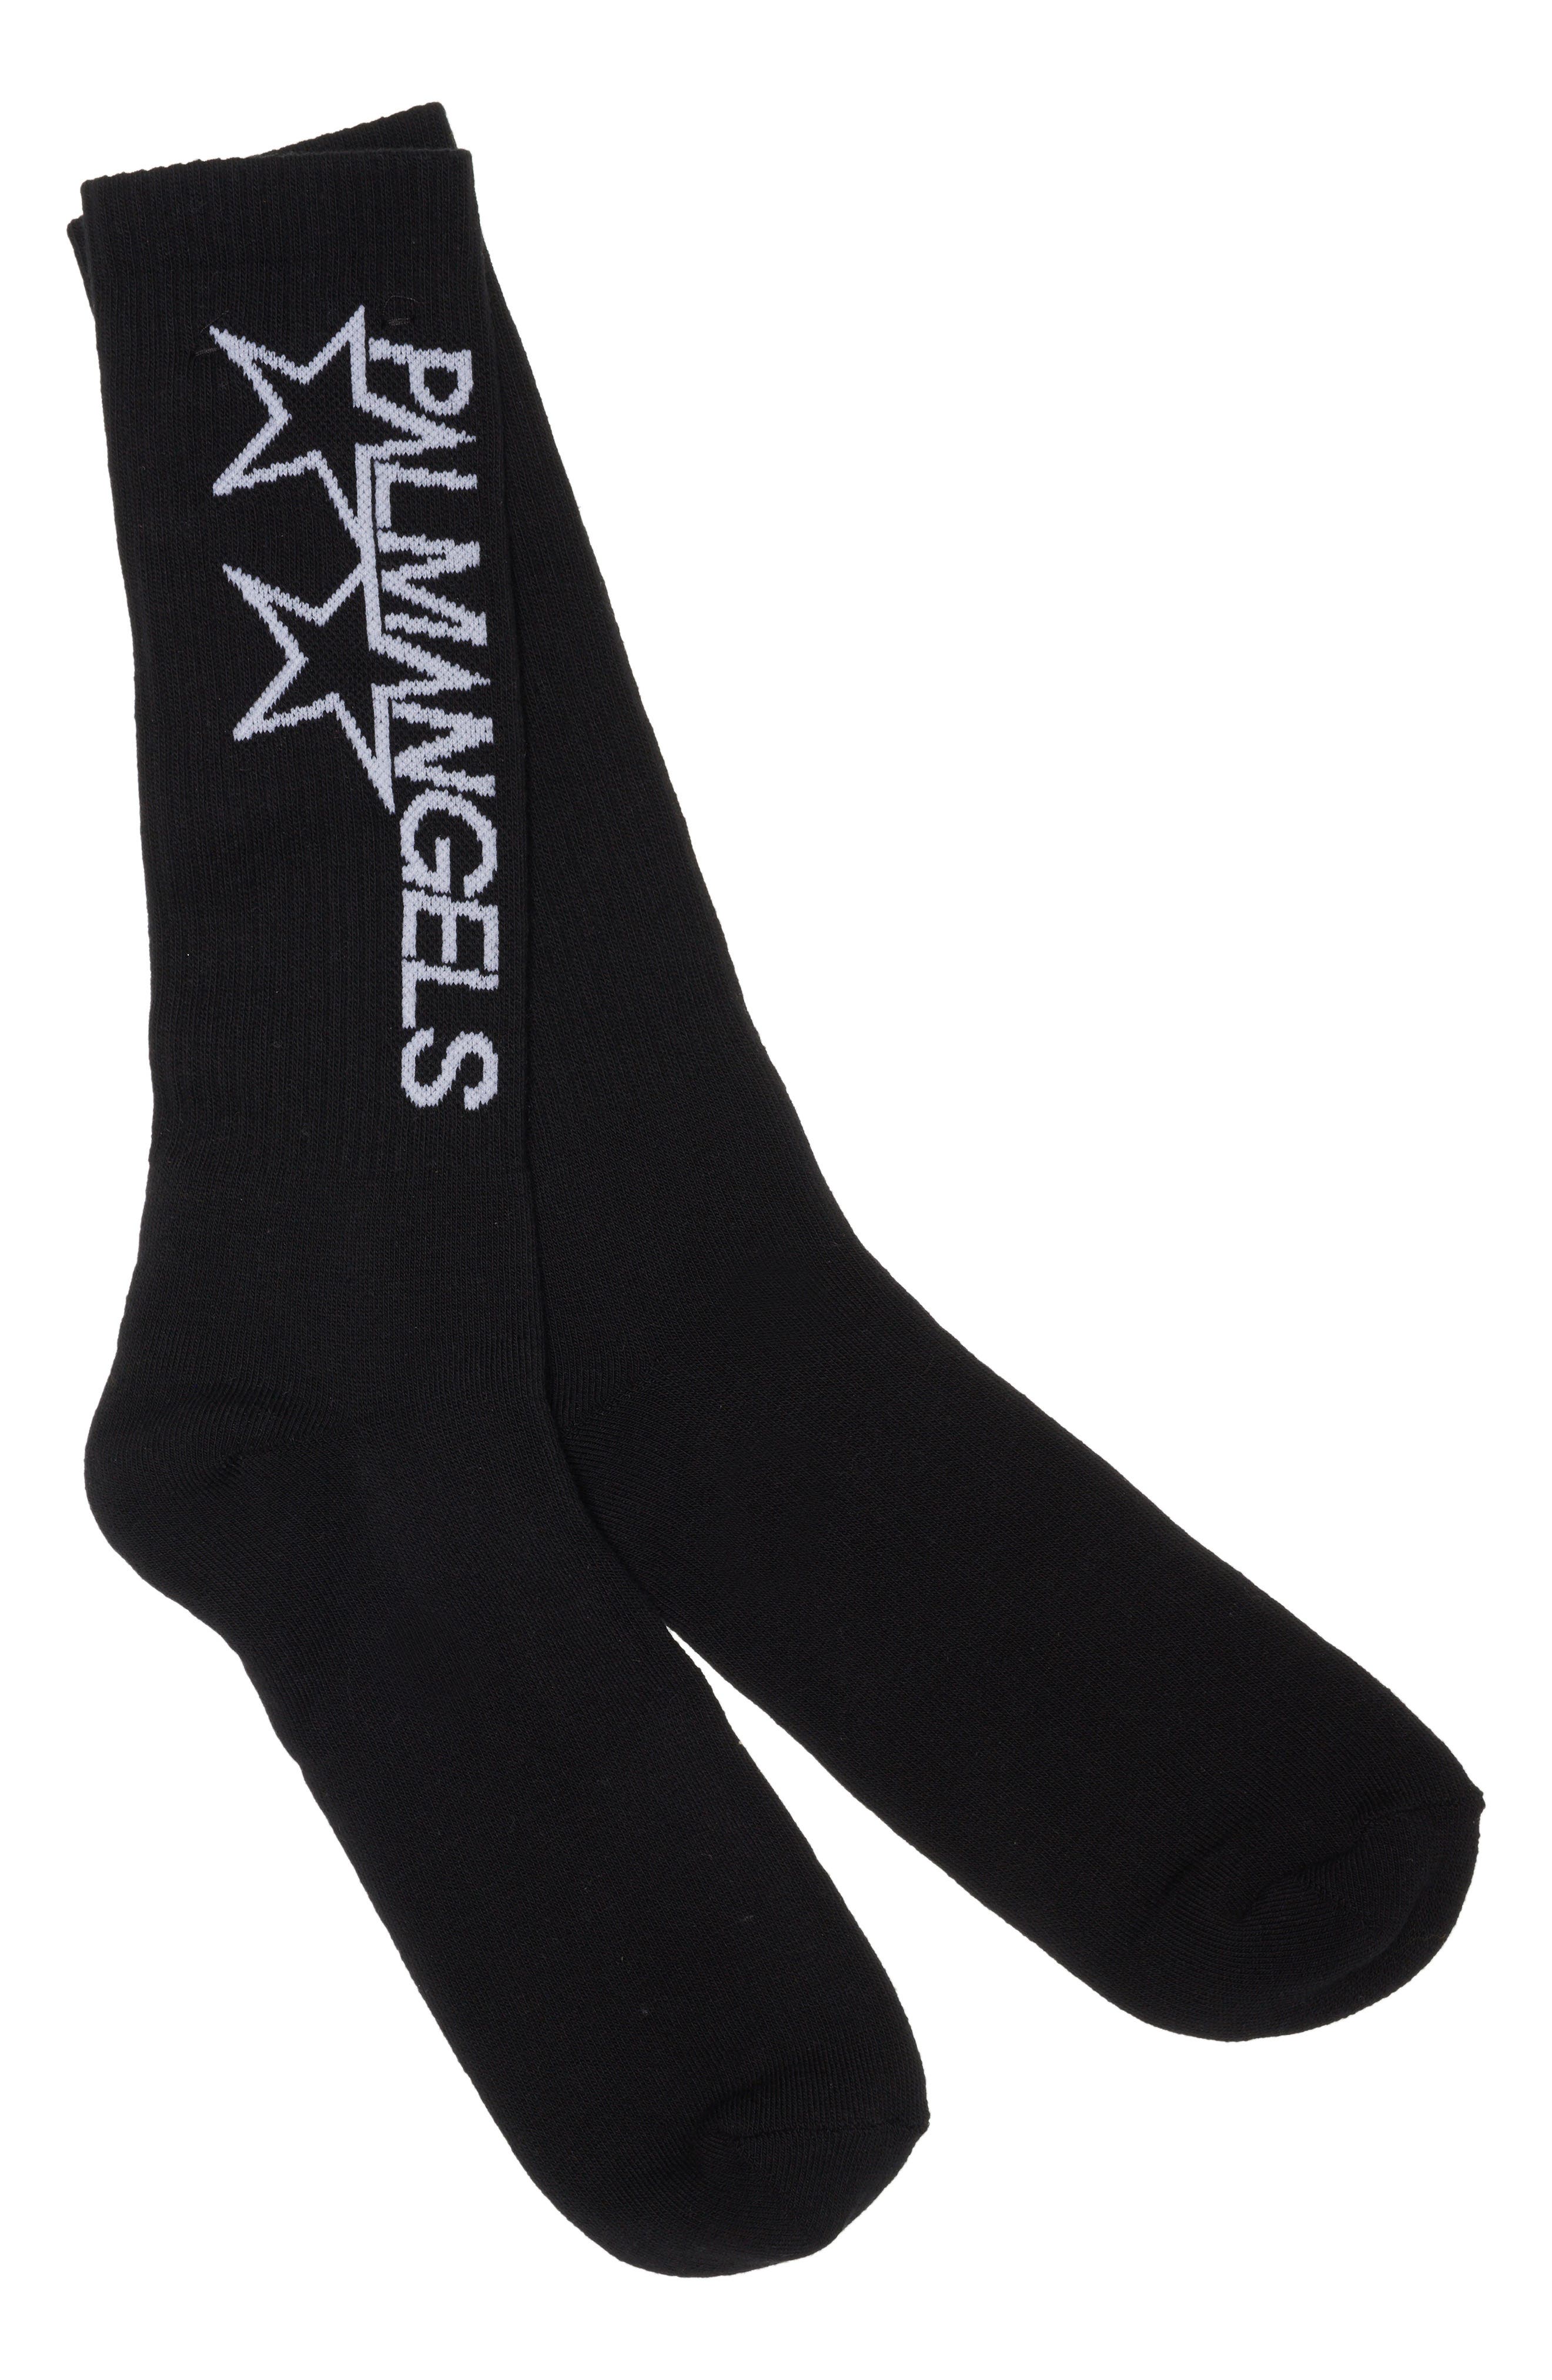 Palm Angels Racing Stars Logo Socks in Black White at Nordstrom, Size Small